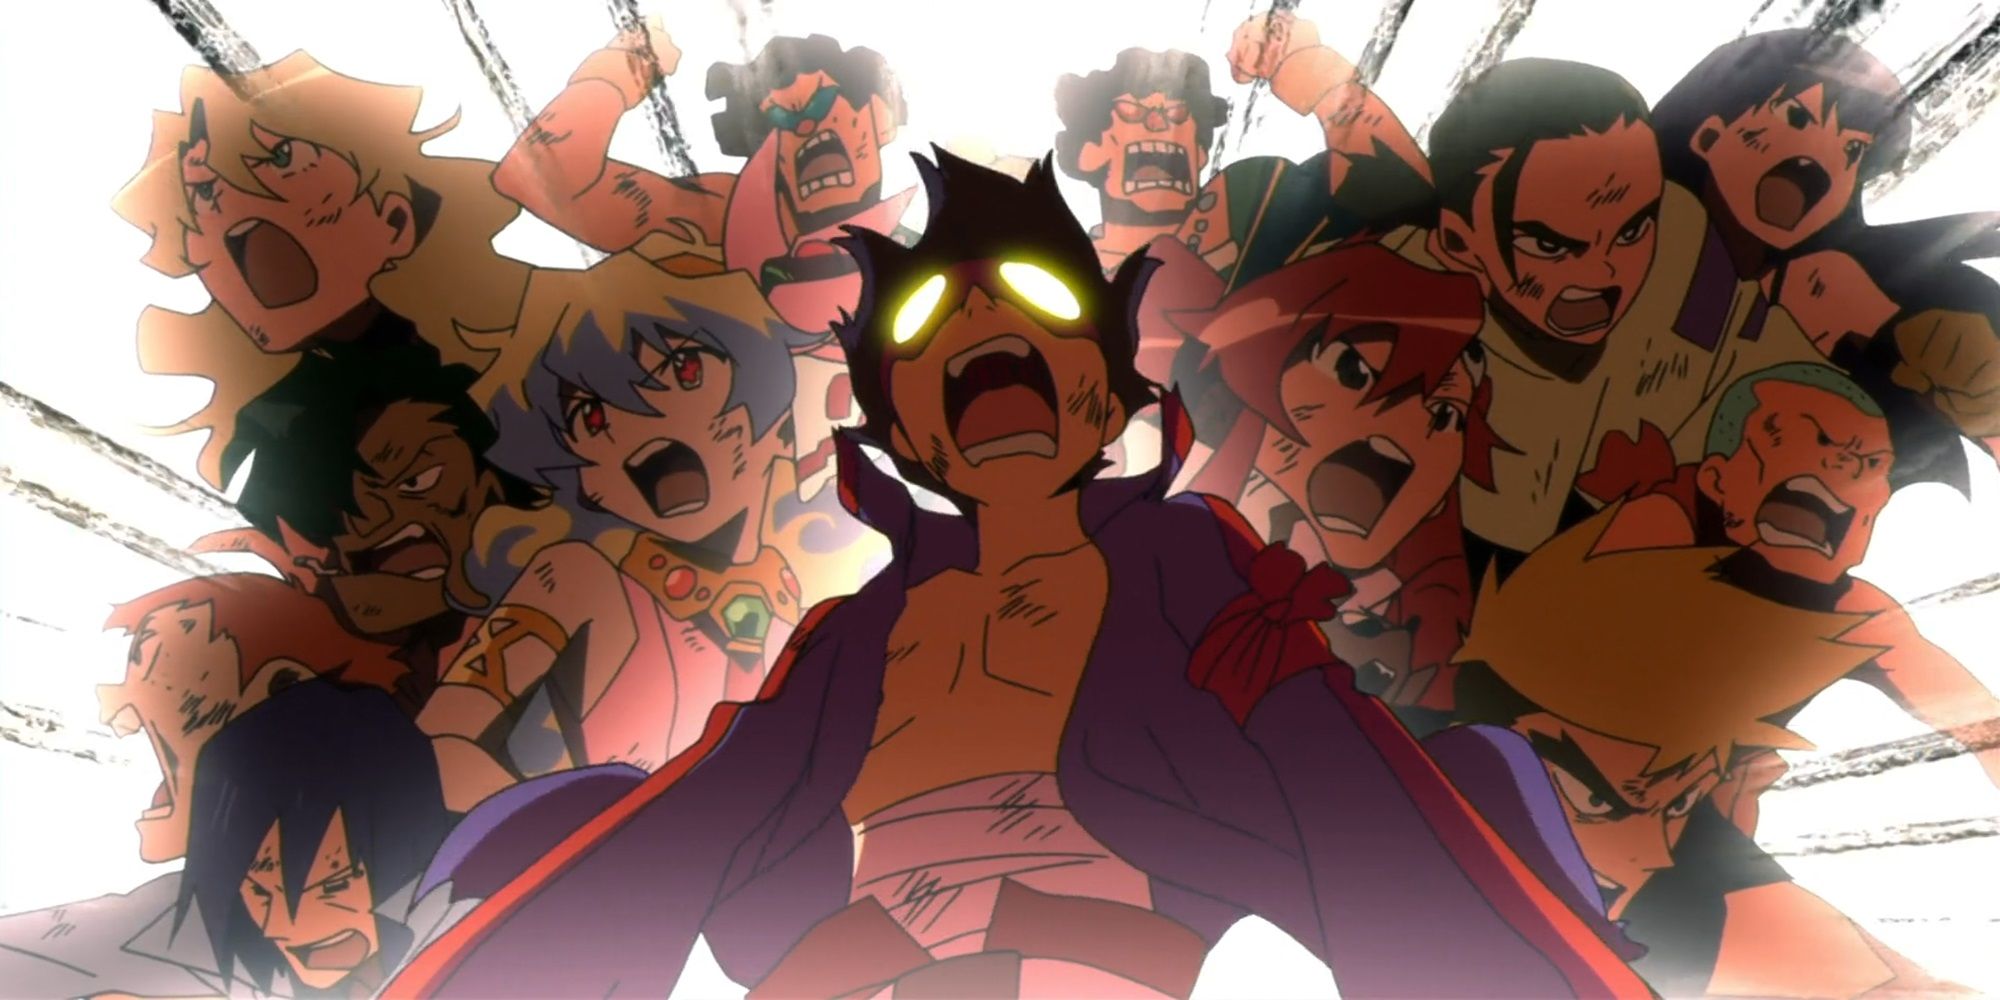 Gurren Lagann Movie 1 Team Dai Gurren yelling while standing together against a white background.